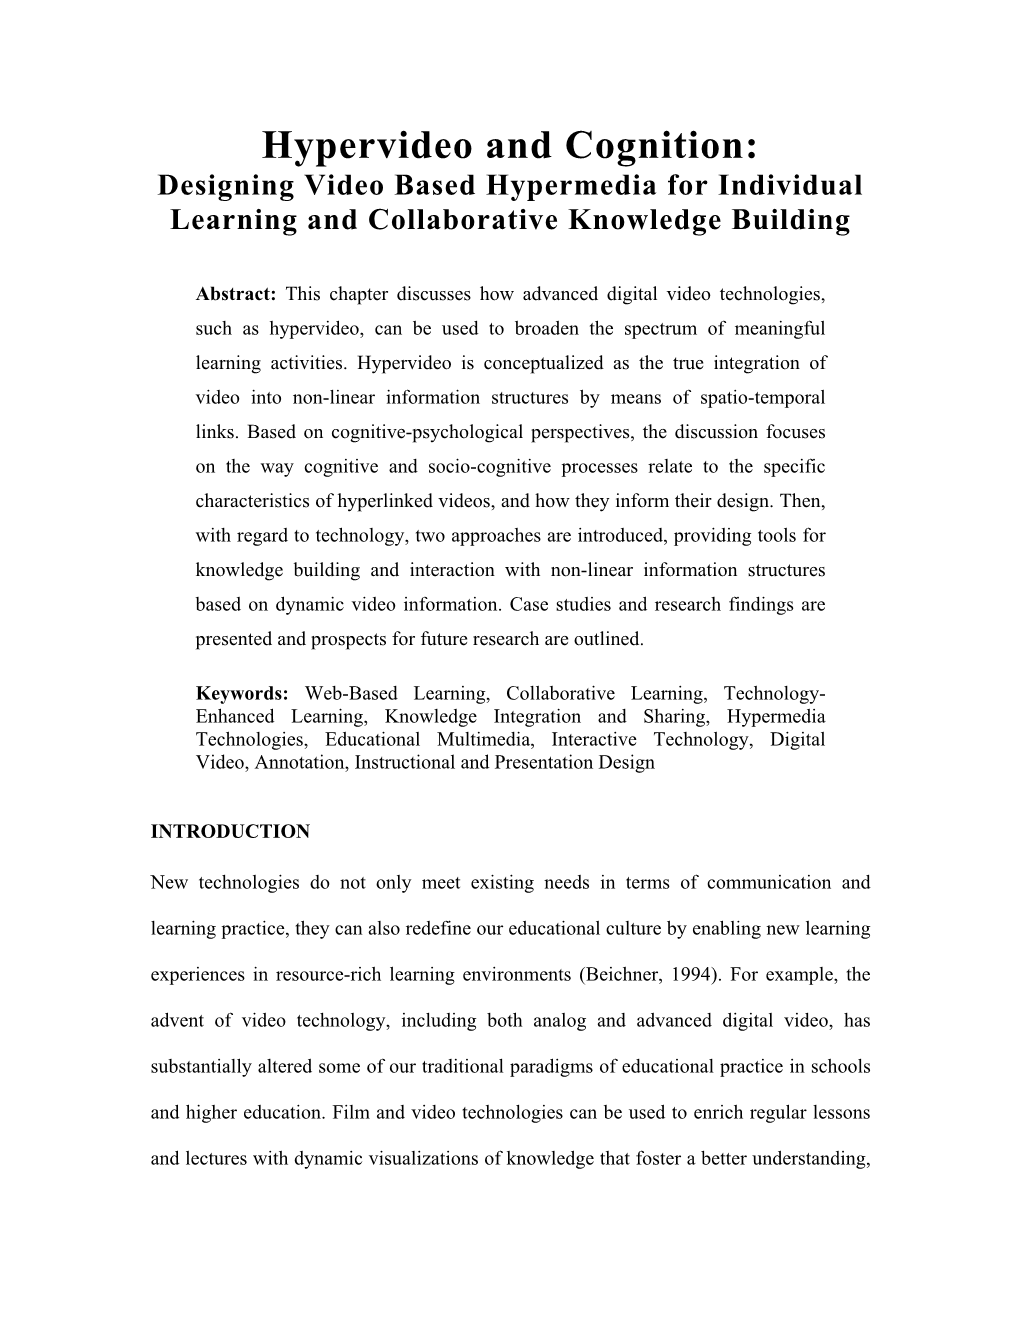 Hypervideo and Cognition: Designing Video Based Hypermedia for Individual Learning and Collaborative Knowledge Building